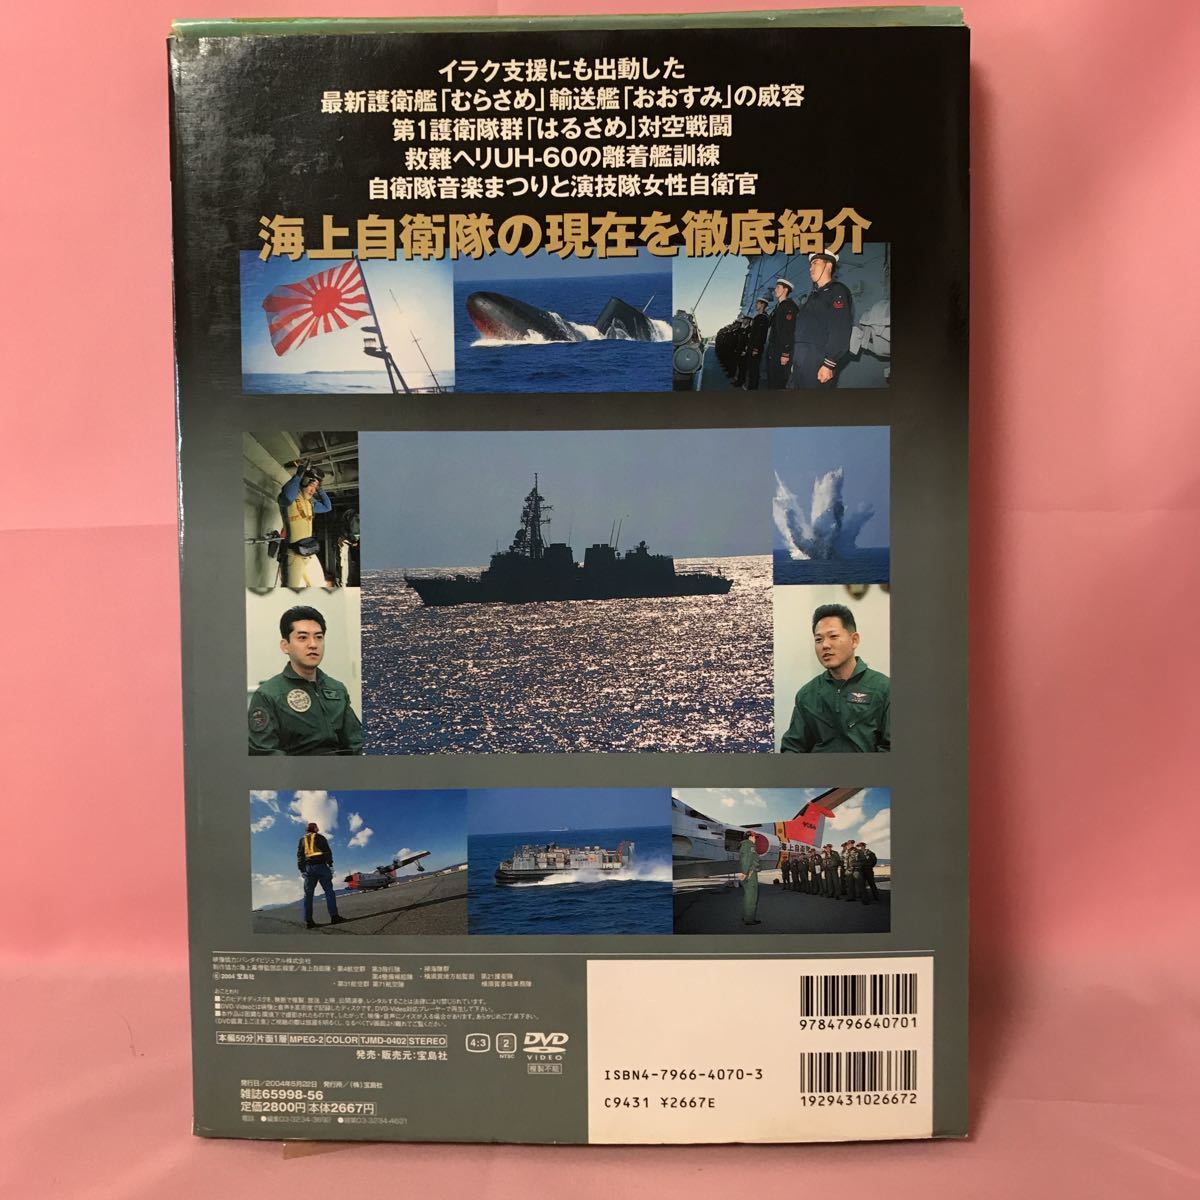 K-031 separate volume "Treasure Island" sea on self ..,. moving![ war power * training *. member ] appendix DVD equipped appendix box tape modification equipped 